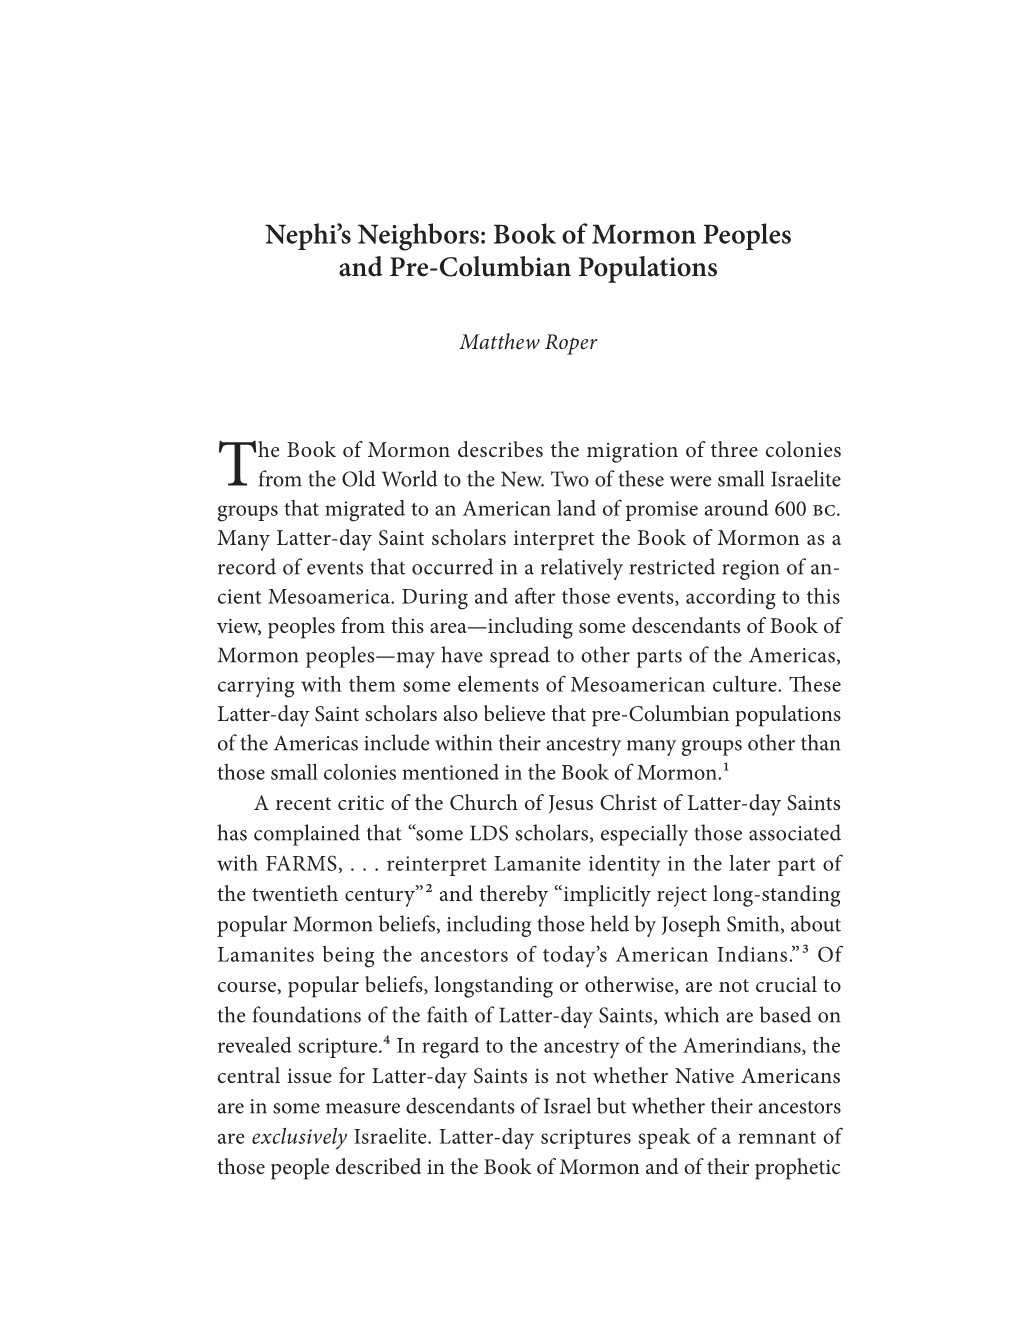 Nephi's Neighbors: Book of Mormon Peoples and Pre-Columbian Populations